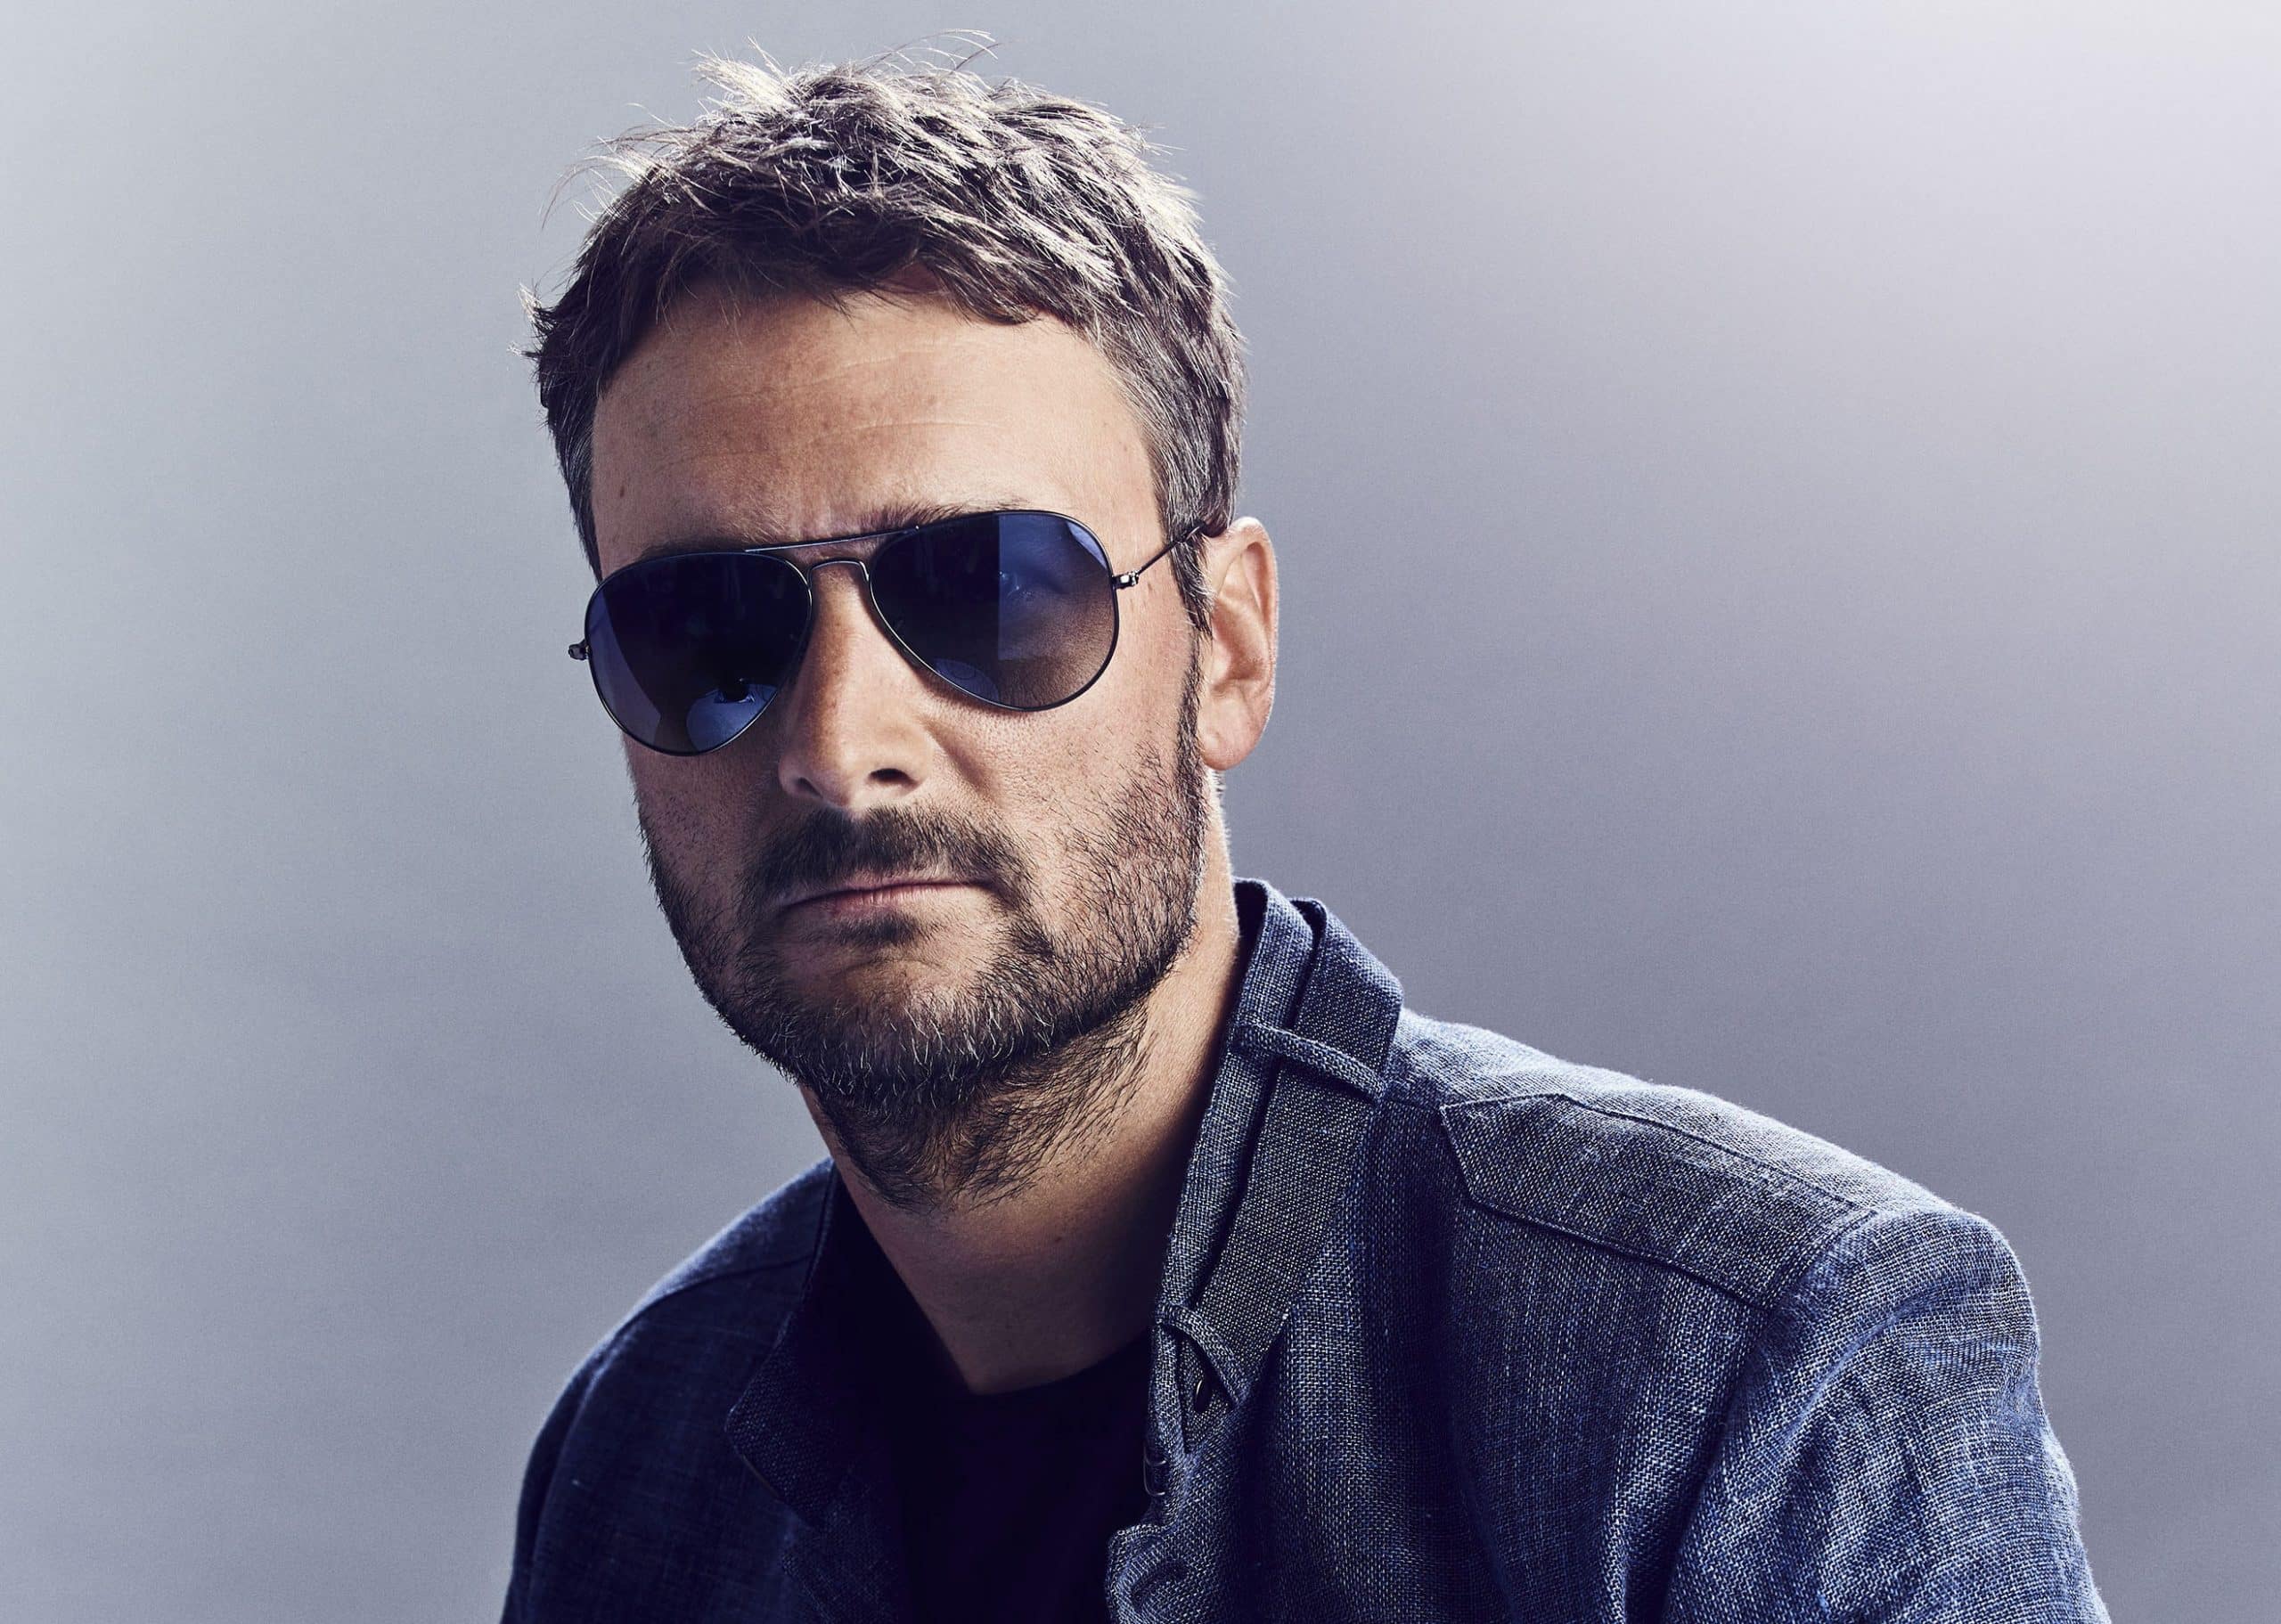 10 Best Eric Church Songs of All Time